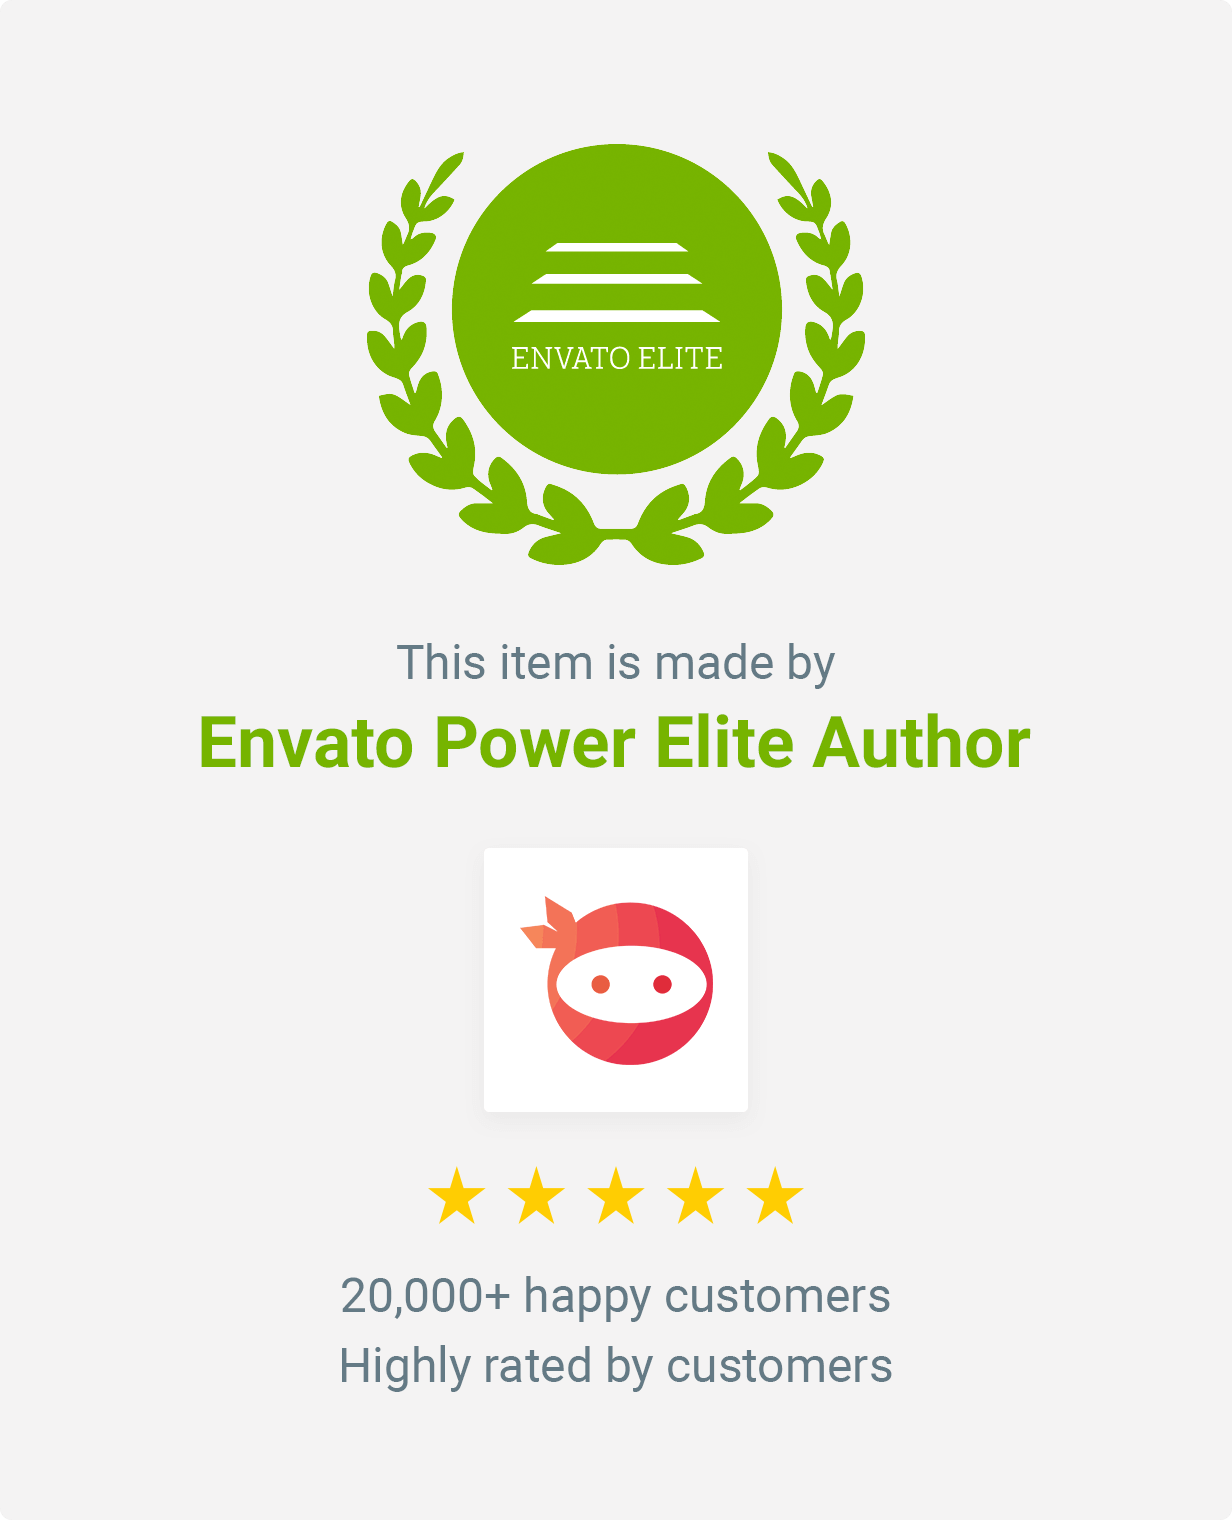 This item is made by Envato Power Elite Author - NinjaTeam